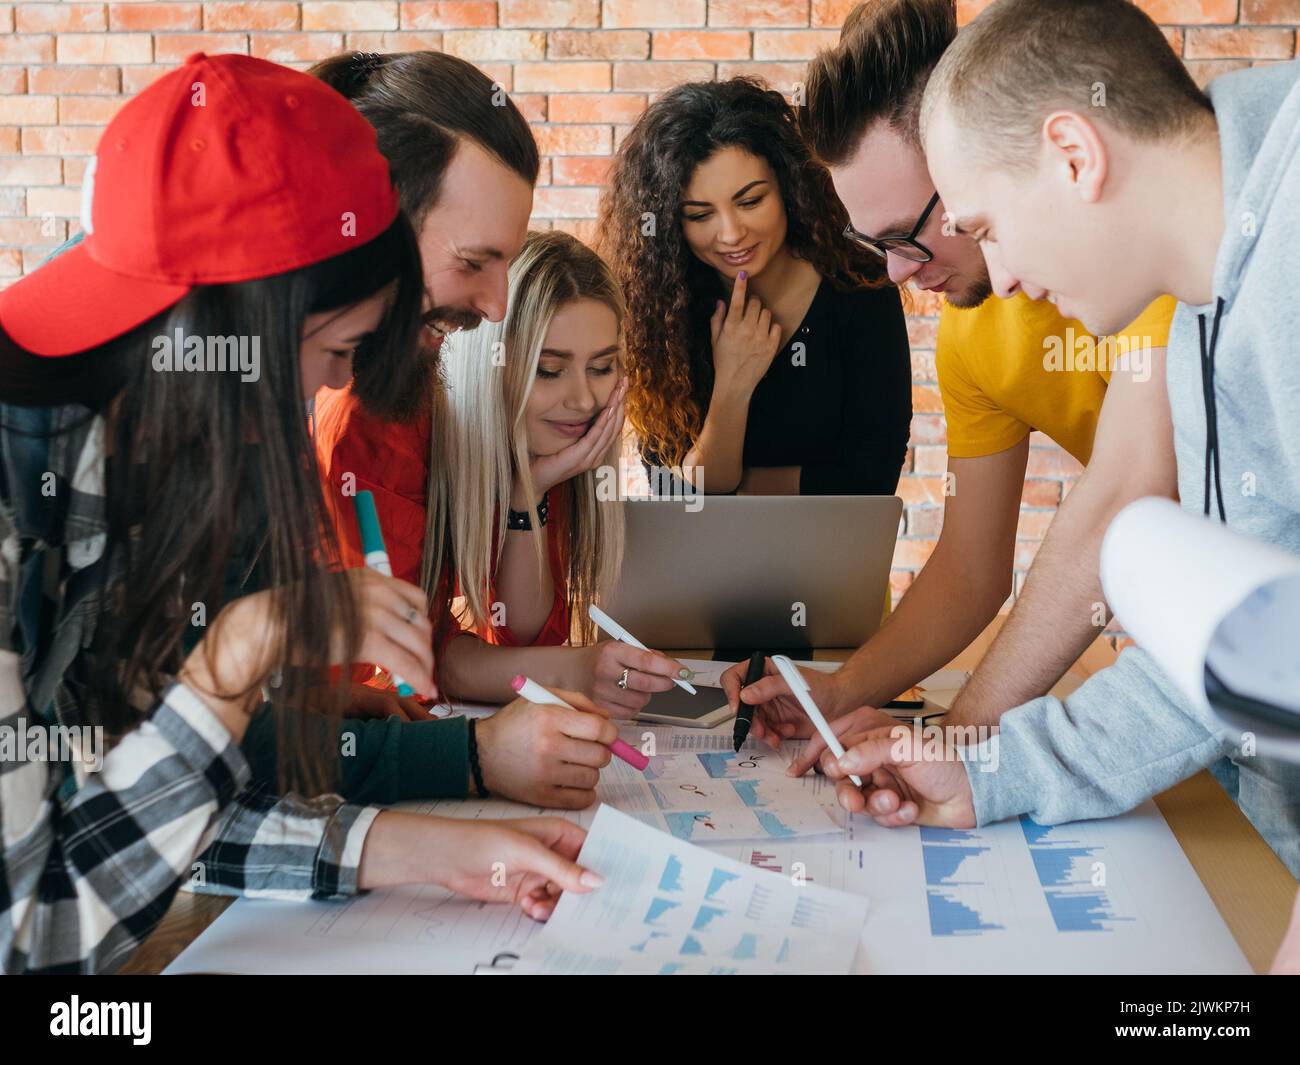 working together business team diagrams strategy Stock Photo